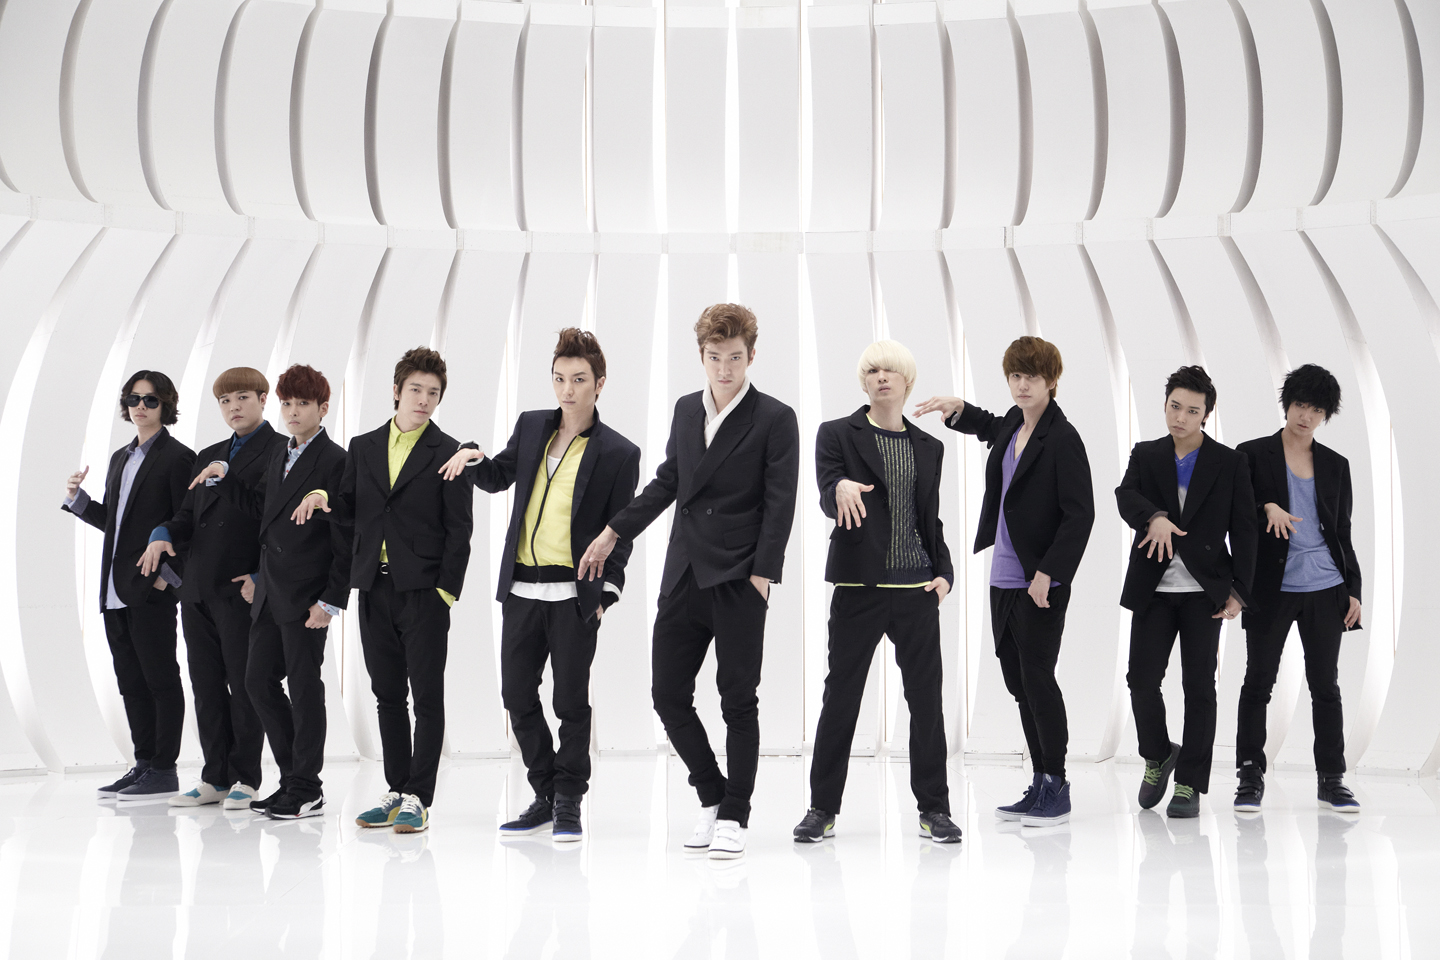 Wallpapers Of The Day: Super Junior | 1440x960 Super Junior Wall Paper